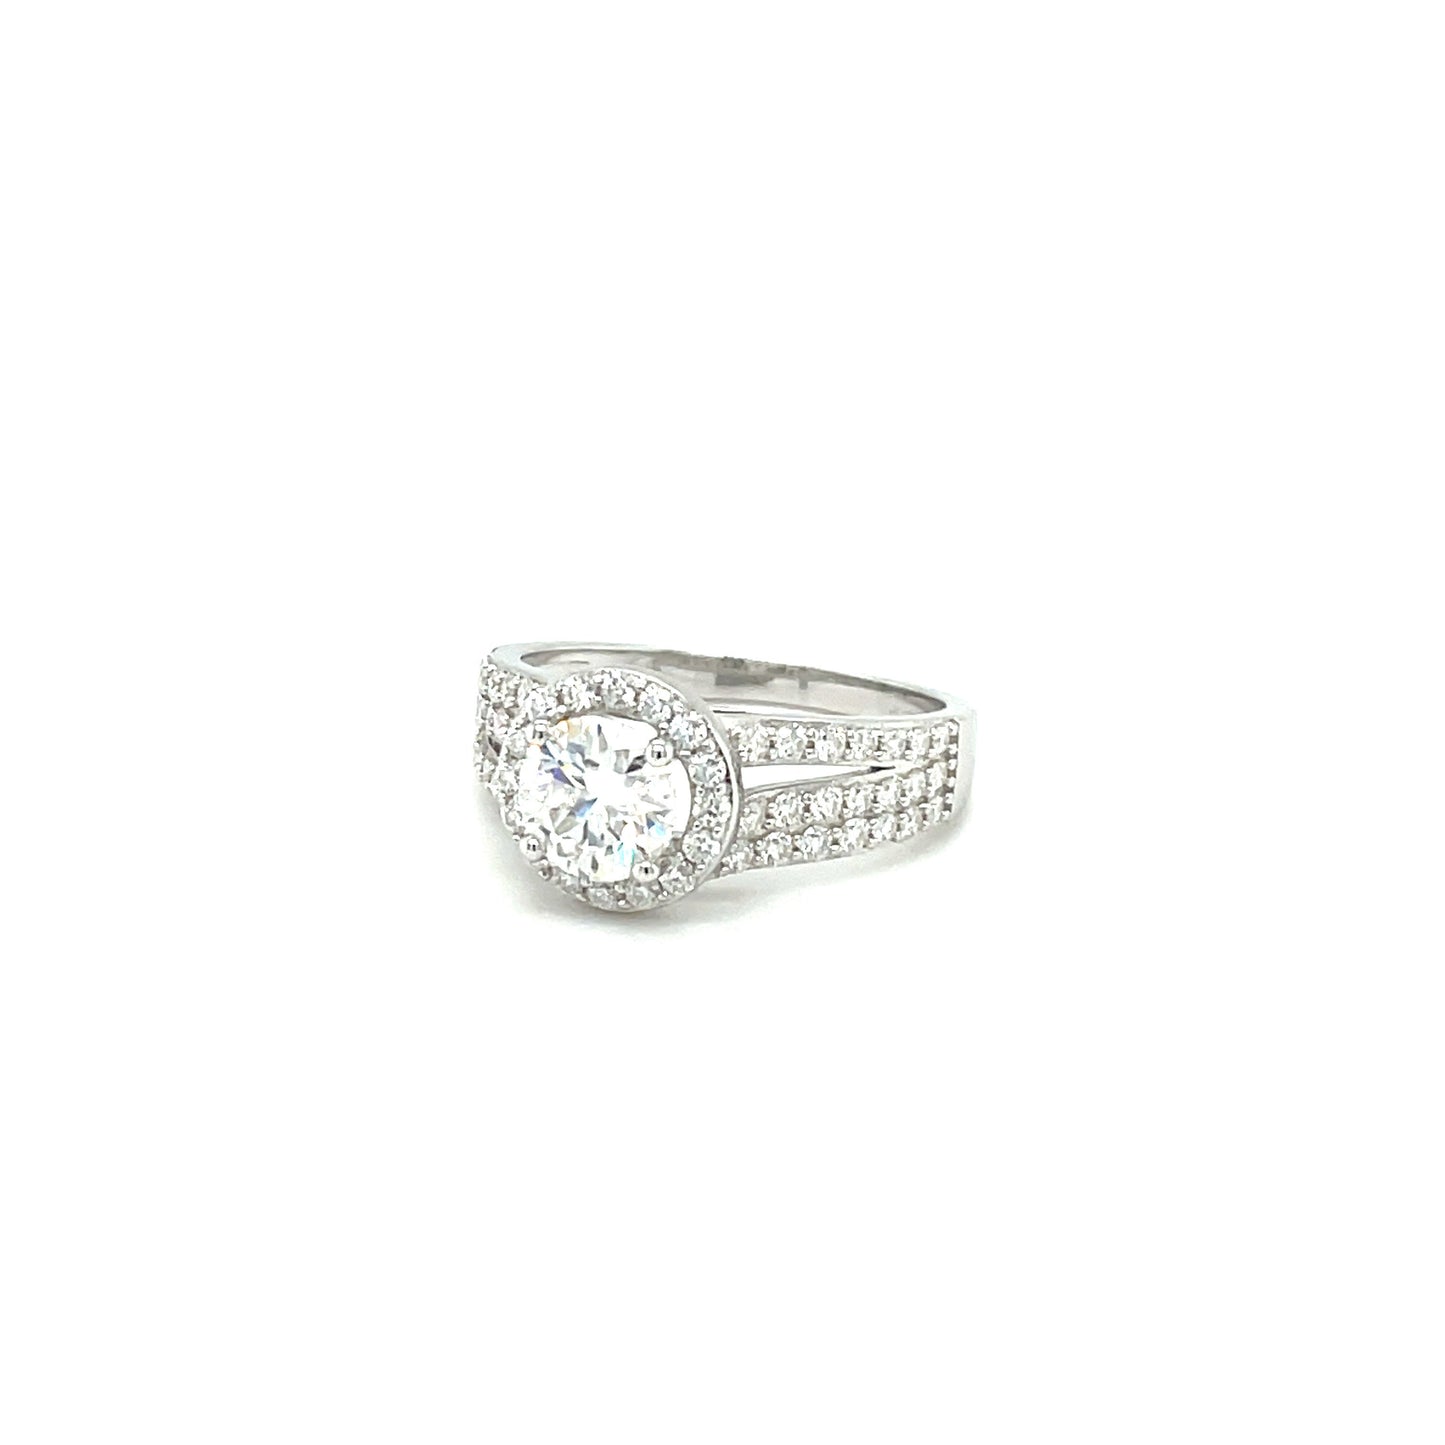 Through Thick & Thin Platinum Plated, Sterling Silver Ring w/1 Ct Round, Halo & Moissanite Gemstone Accents